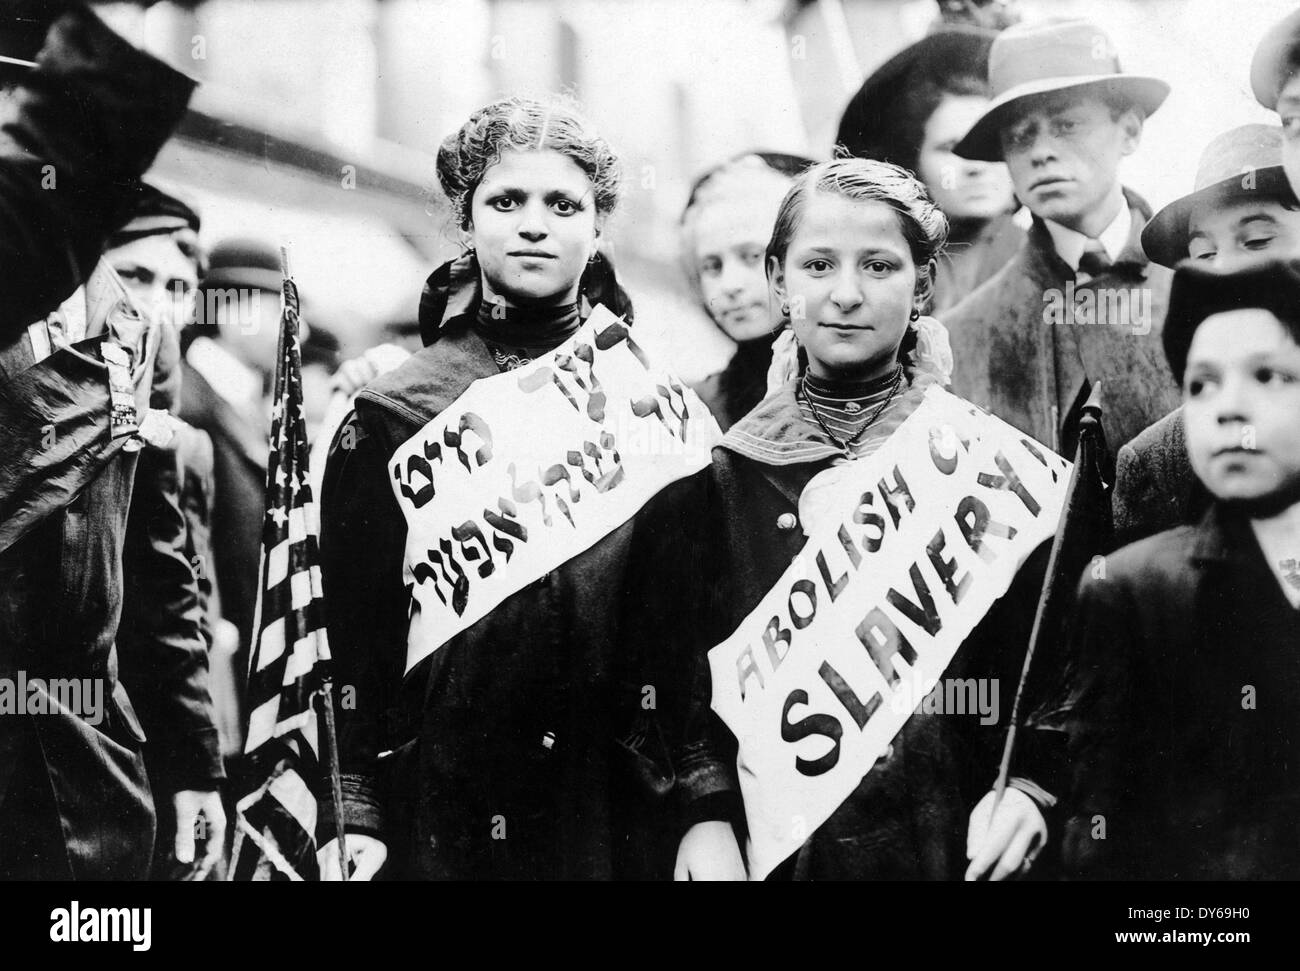 CHILD SLAVERY Girls with  slogans in Yiddish and English during a Labor Day parade in New York, 1 May 1909 Stock Photo